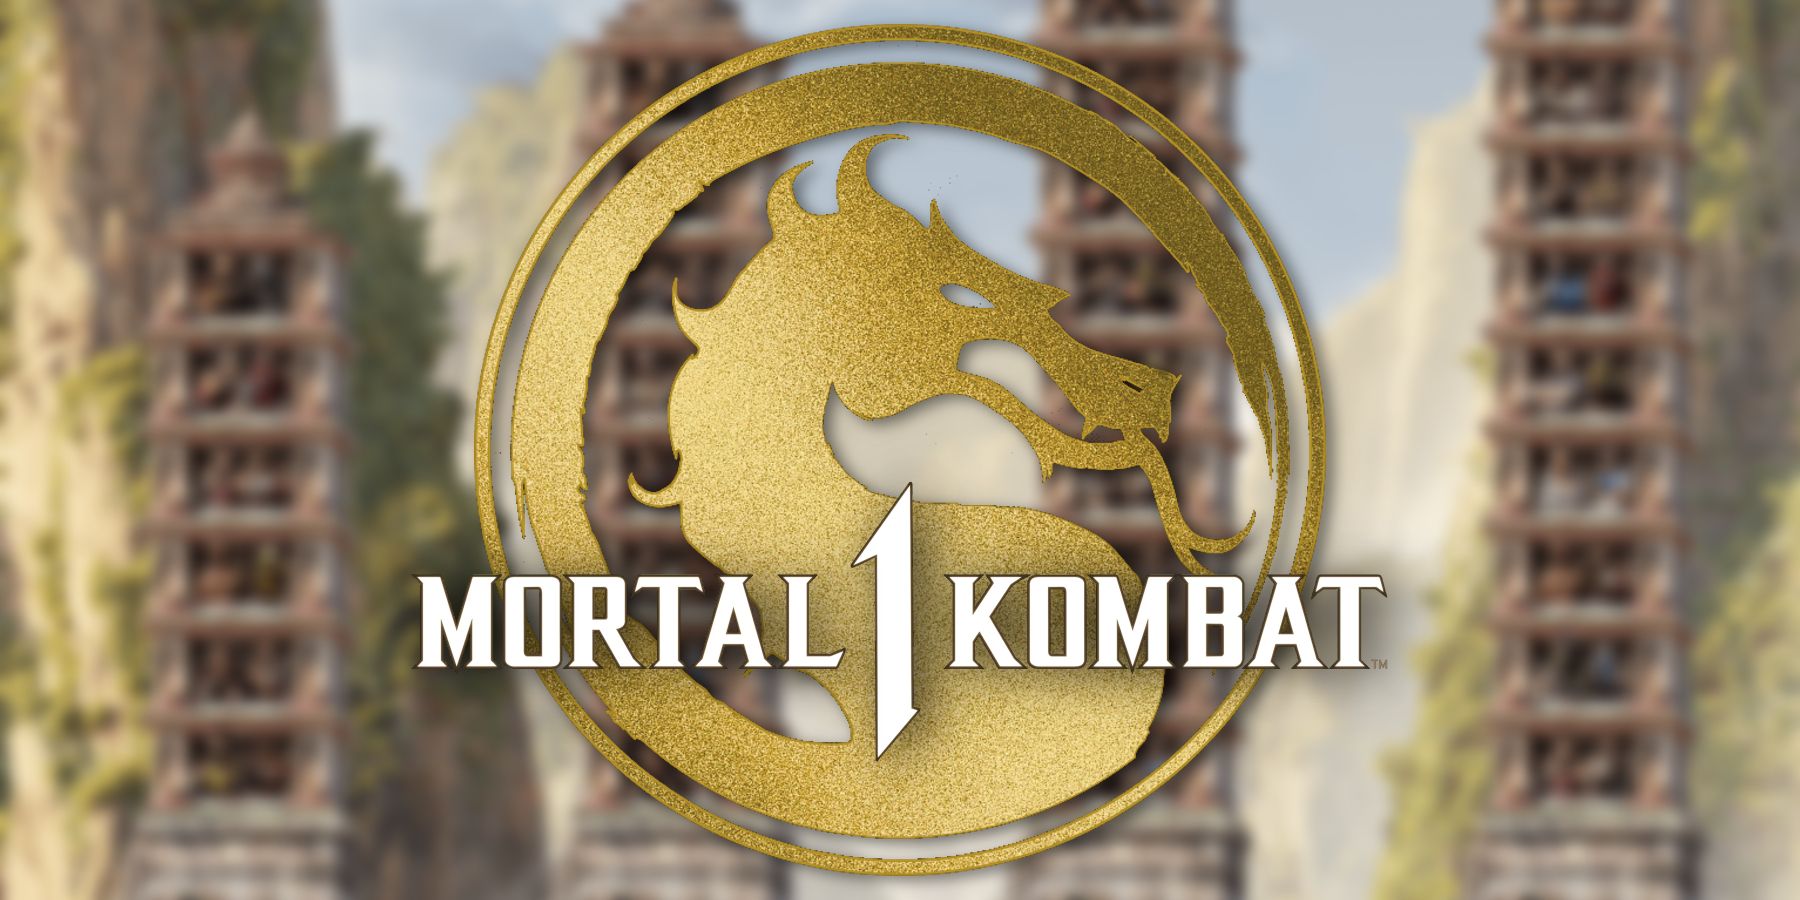 One Mortal Kombat Tower Ending is Perfect For a Full DLC Expansion